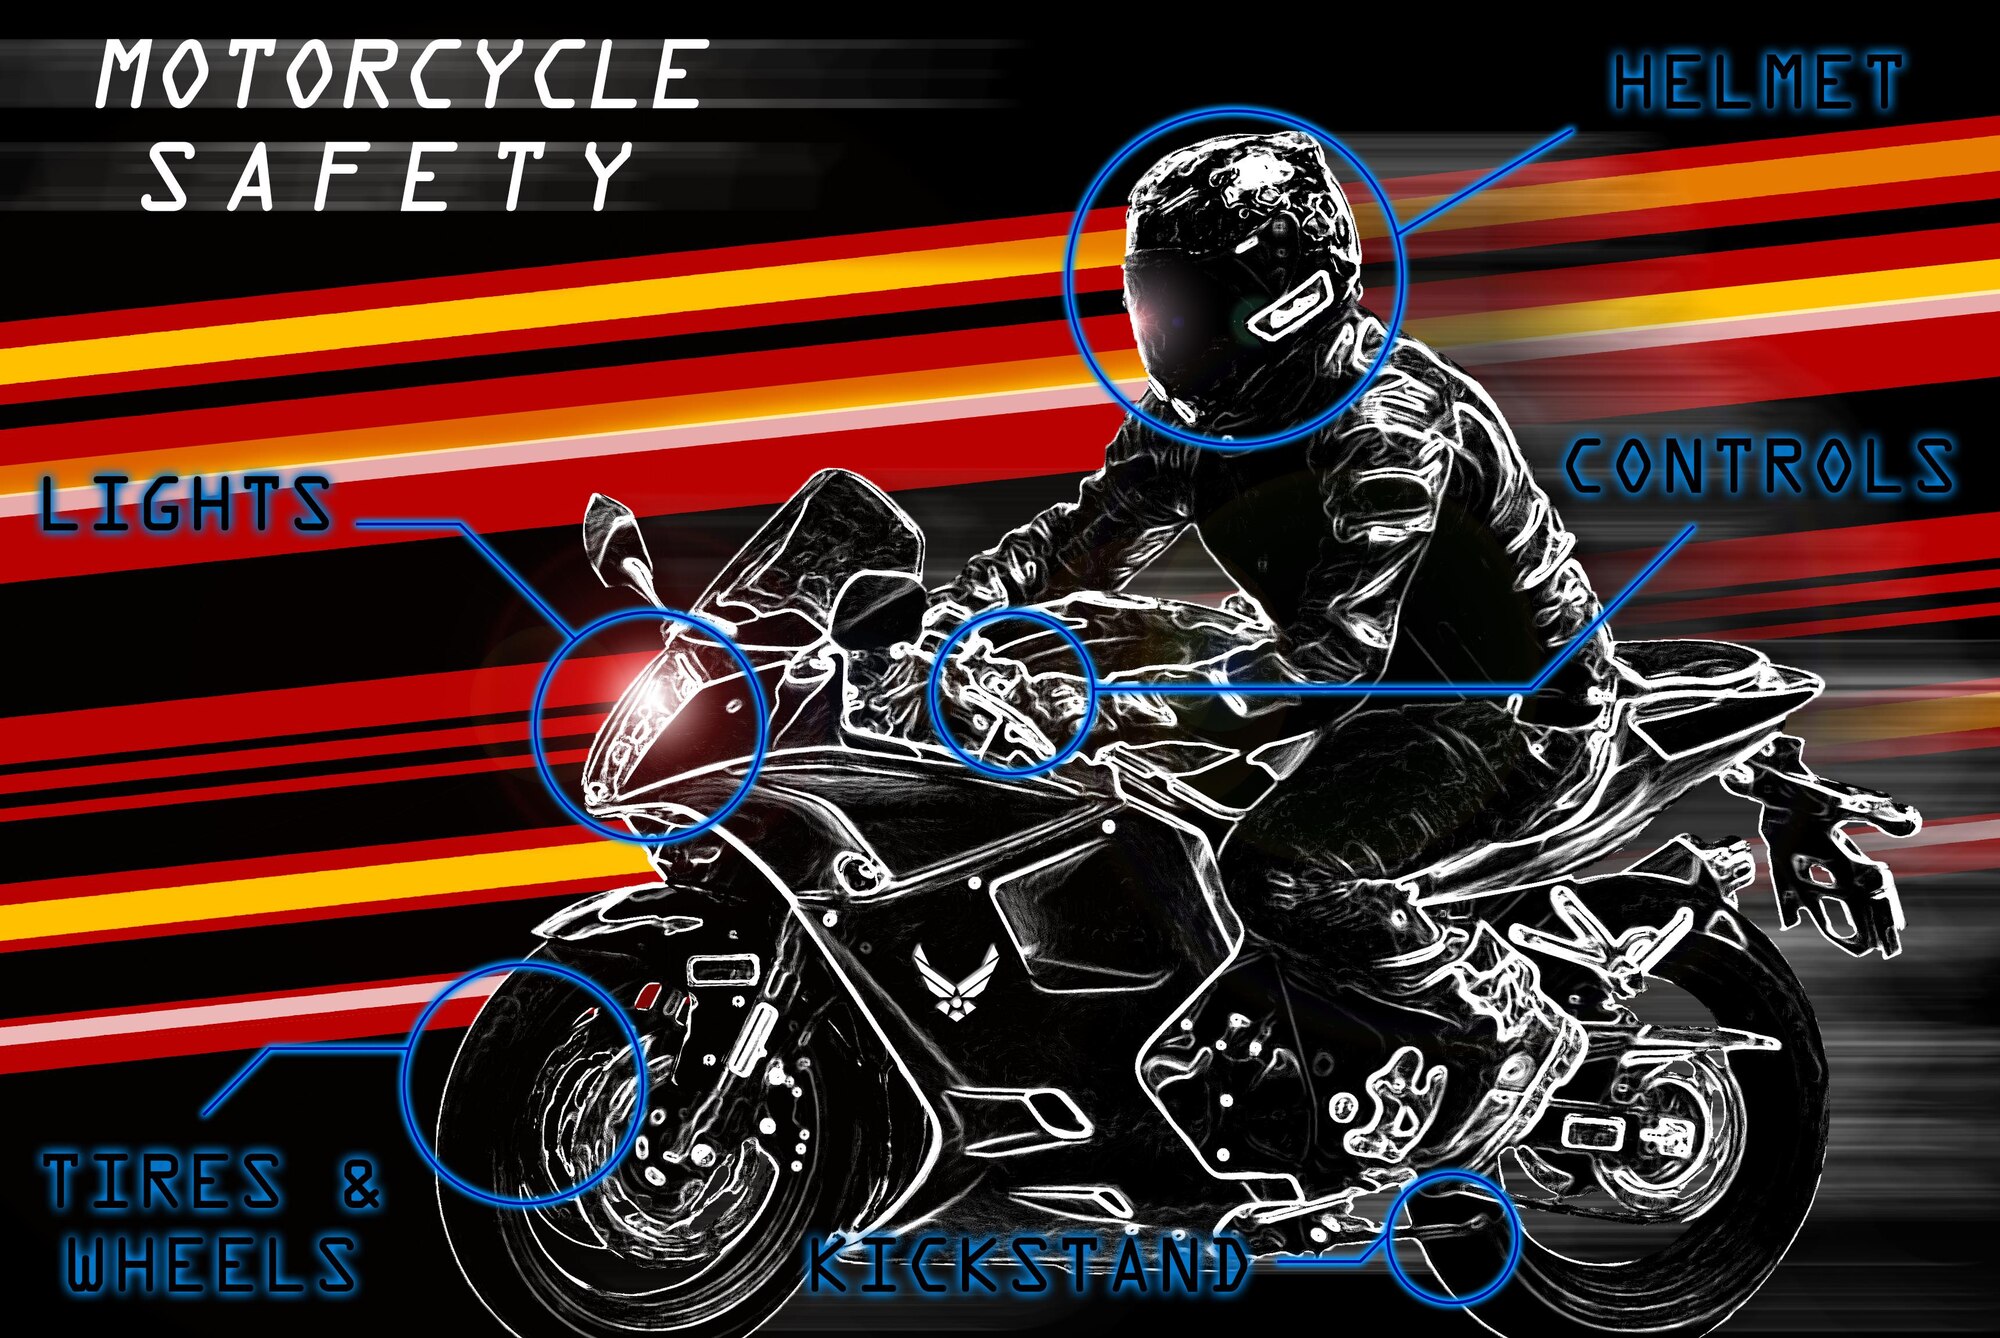 May is Motorcycle Safety Awareness Month. Before riding, be sure to check the T-CLOCK: tires and wheels, controls, lights, oil, chassis and kickstand. (U.S. Air Force graphic illustration by Airman 1st Class Devin Boyer/Released)